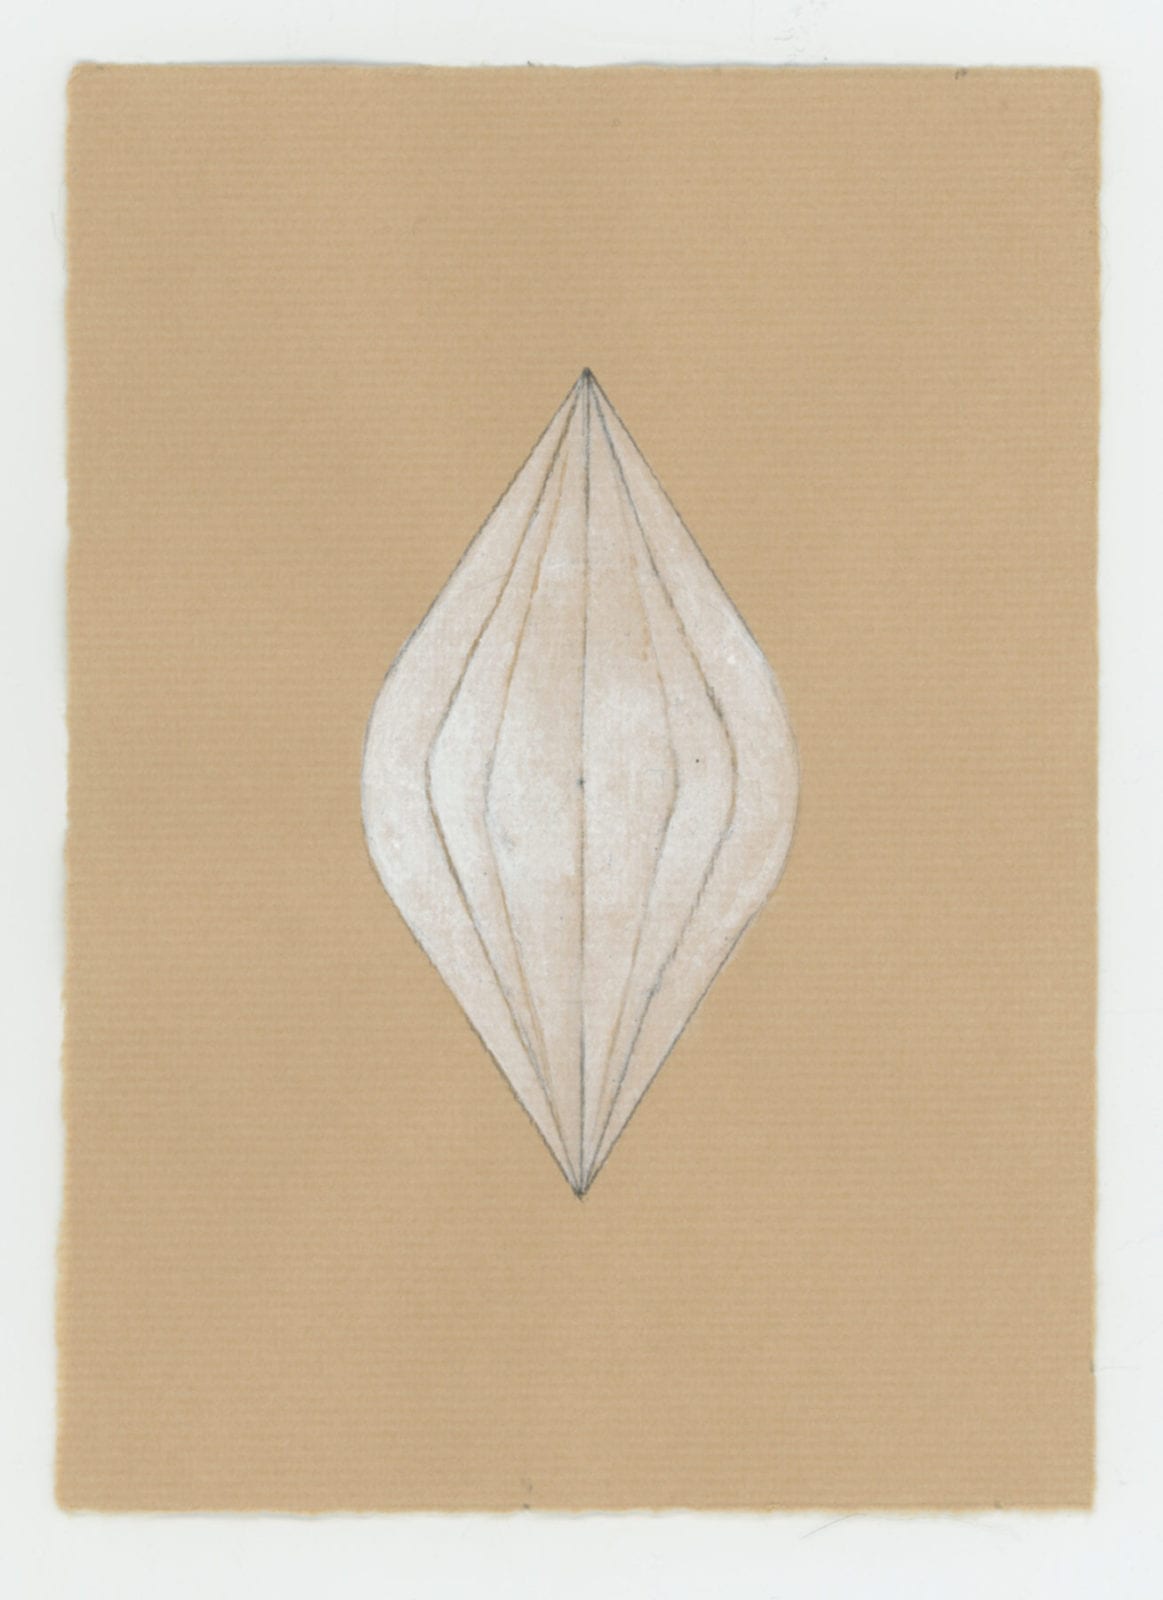 Kim Matthews, Prayer for Renewal, graphite and gouache on pape,r 5 x 7 inches